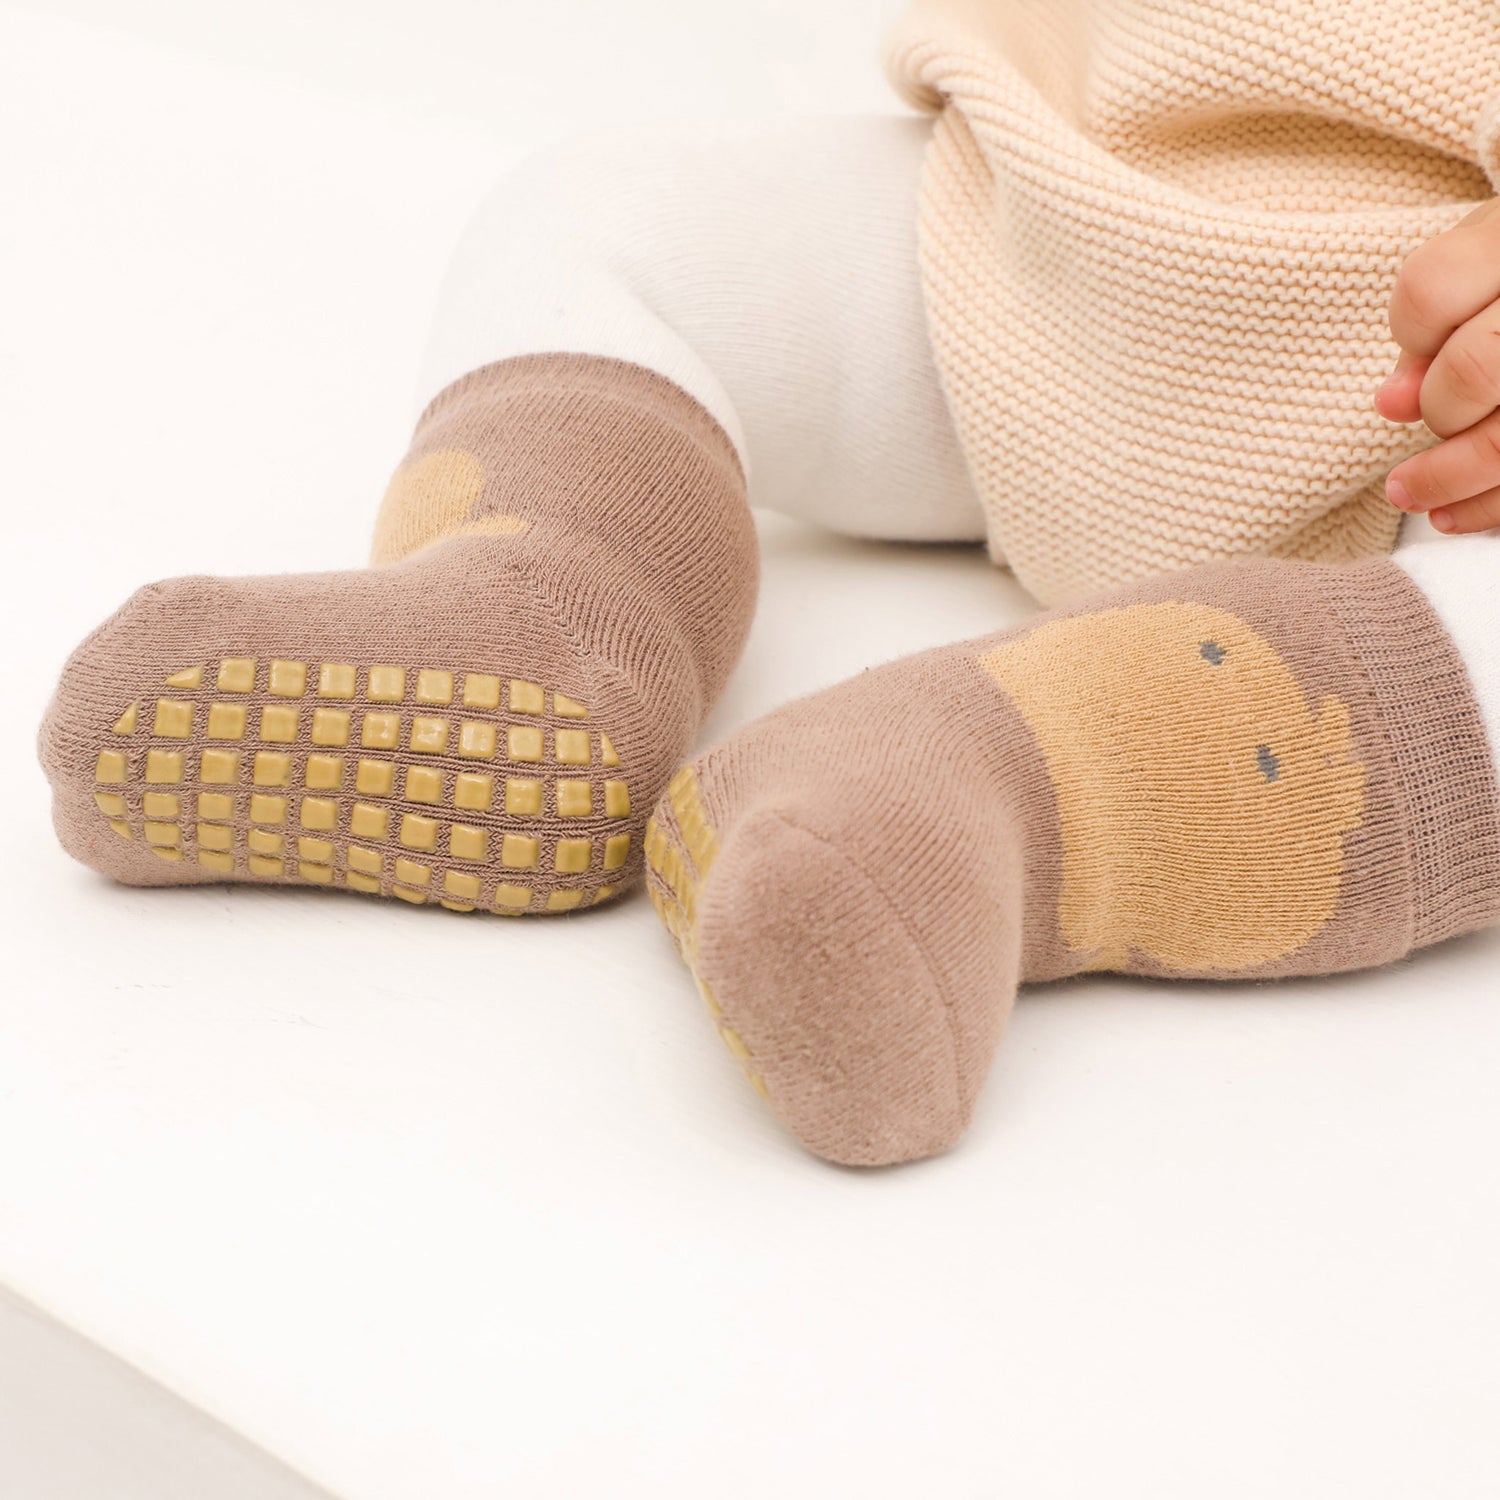 A variety of hues in non-slip baby socks, providing safety in every step and color for every outfit.